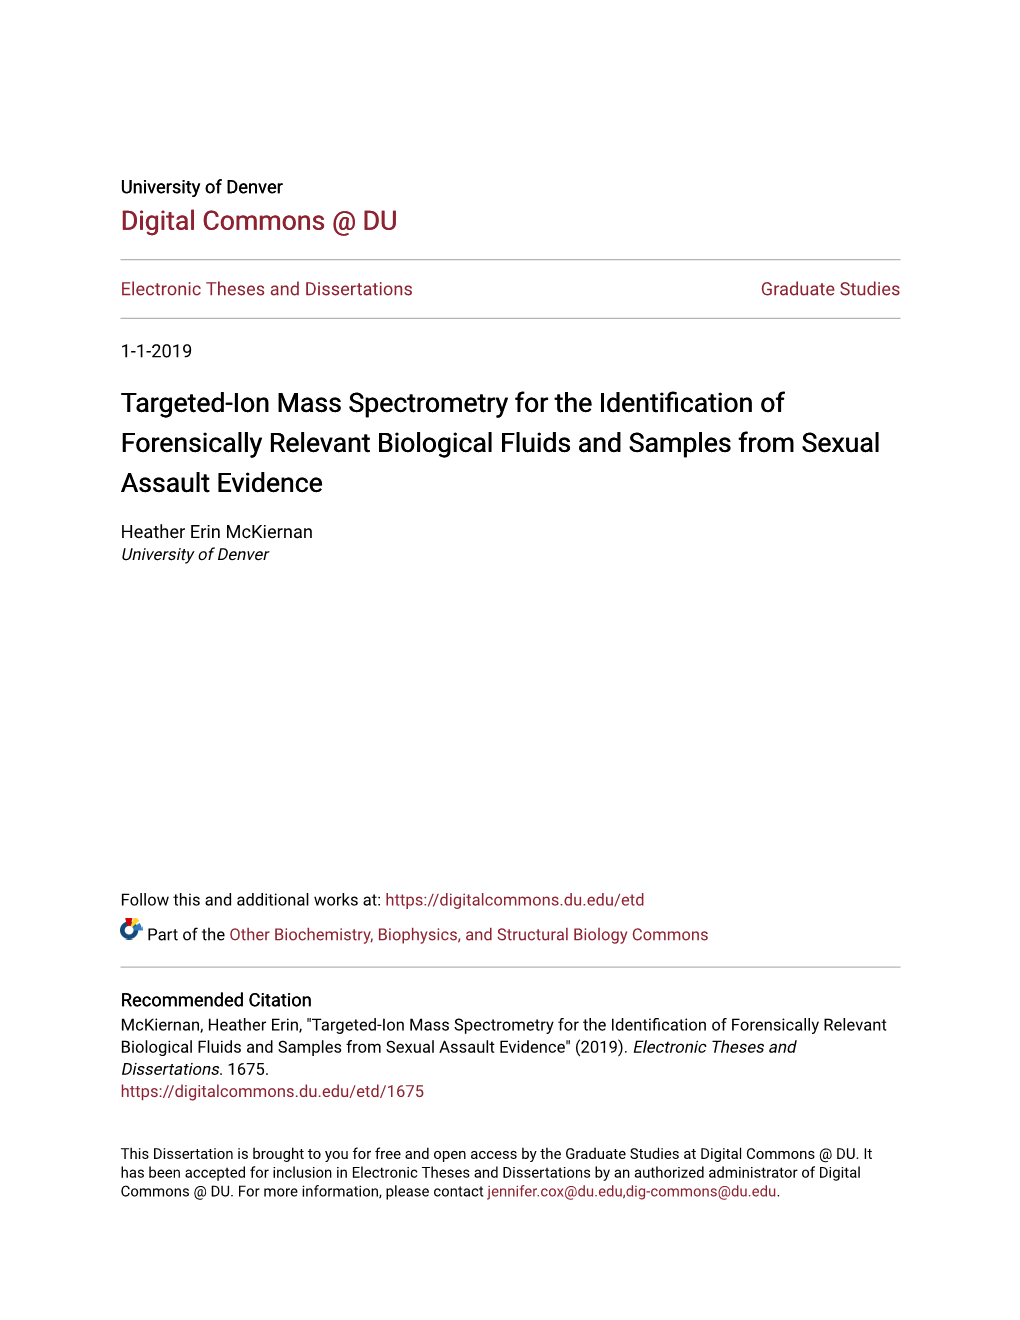 Targeted-Ion Mass Spectrometry for the Identification of Forensically Relevant Biological Fluids and Samples from Sexual Assault Evidence